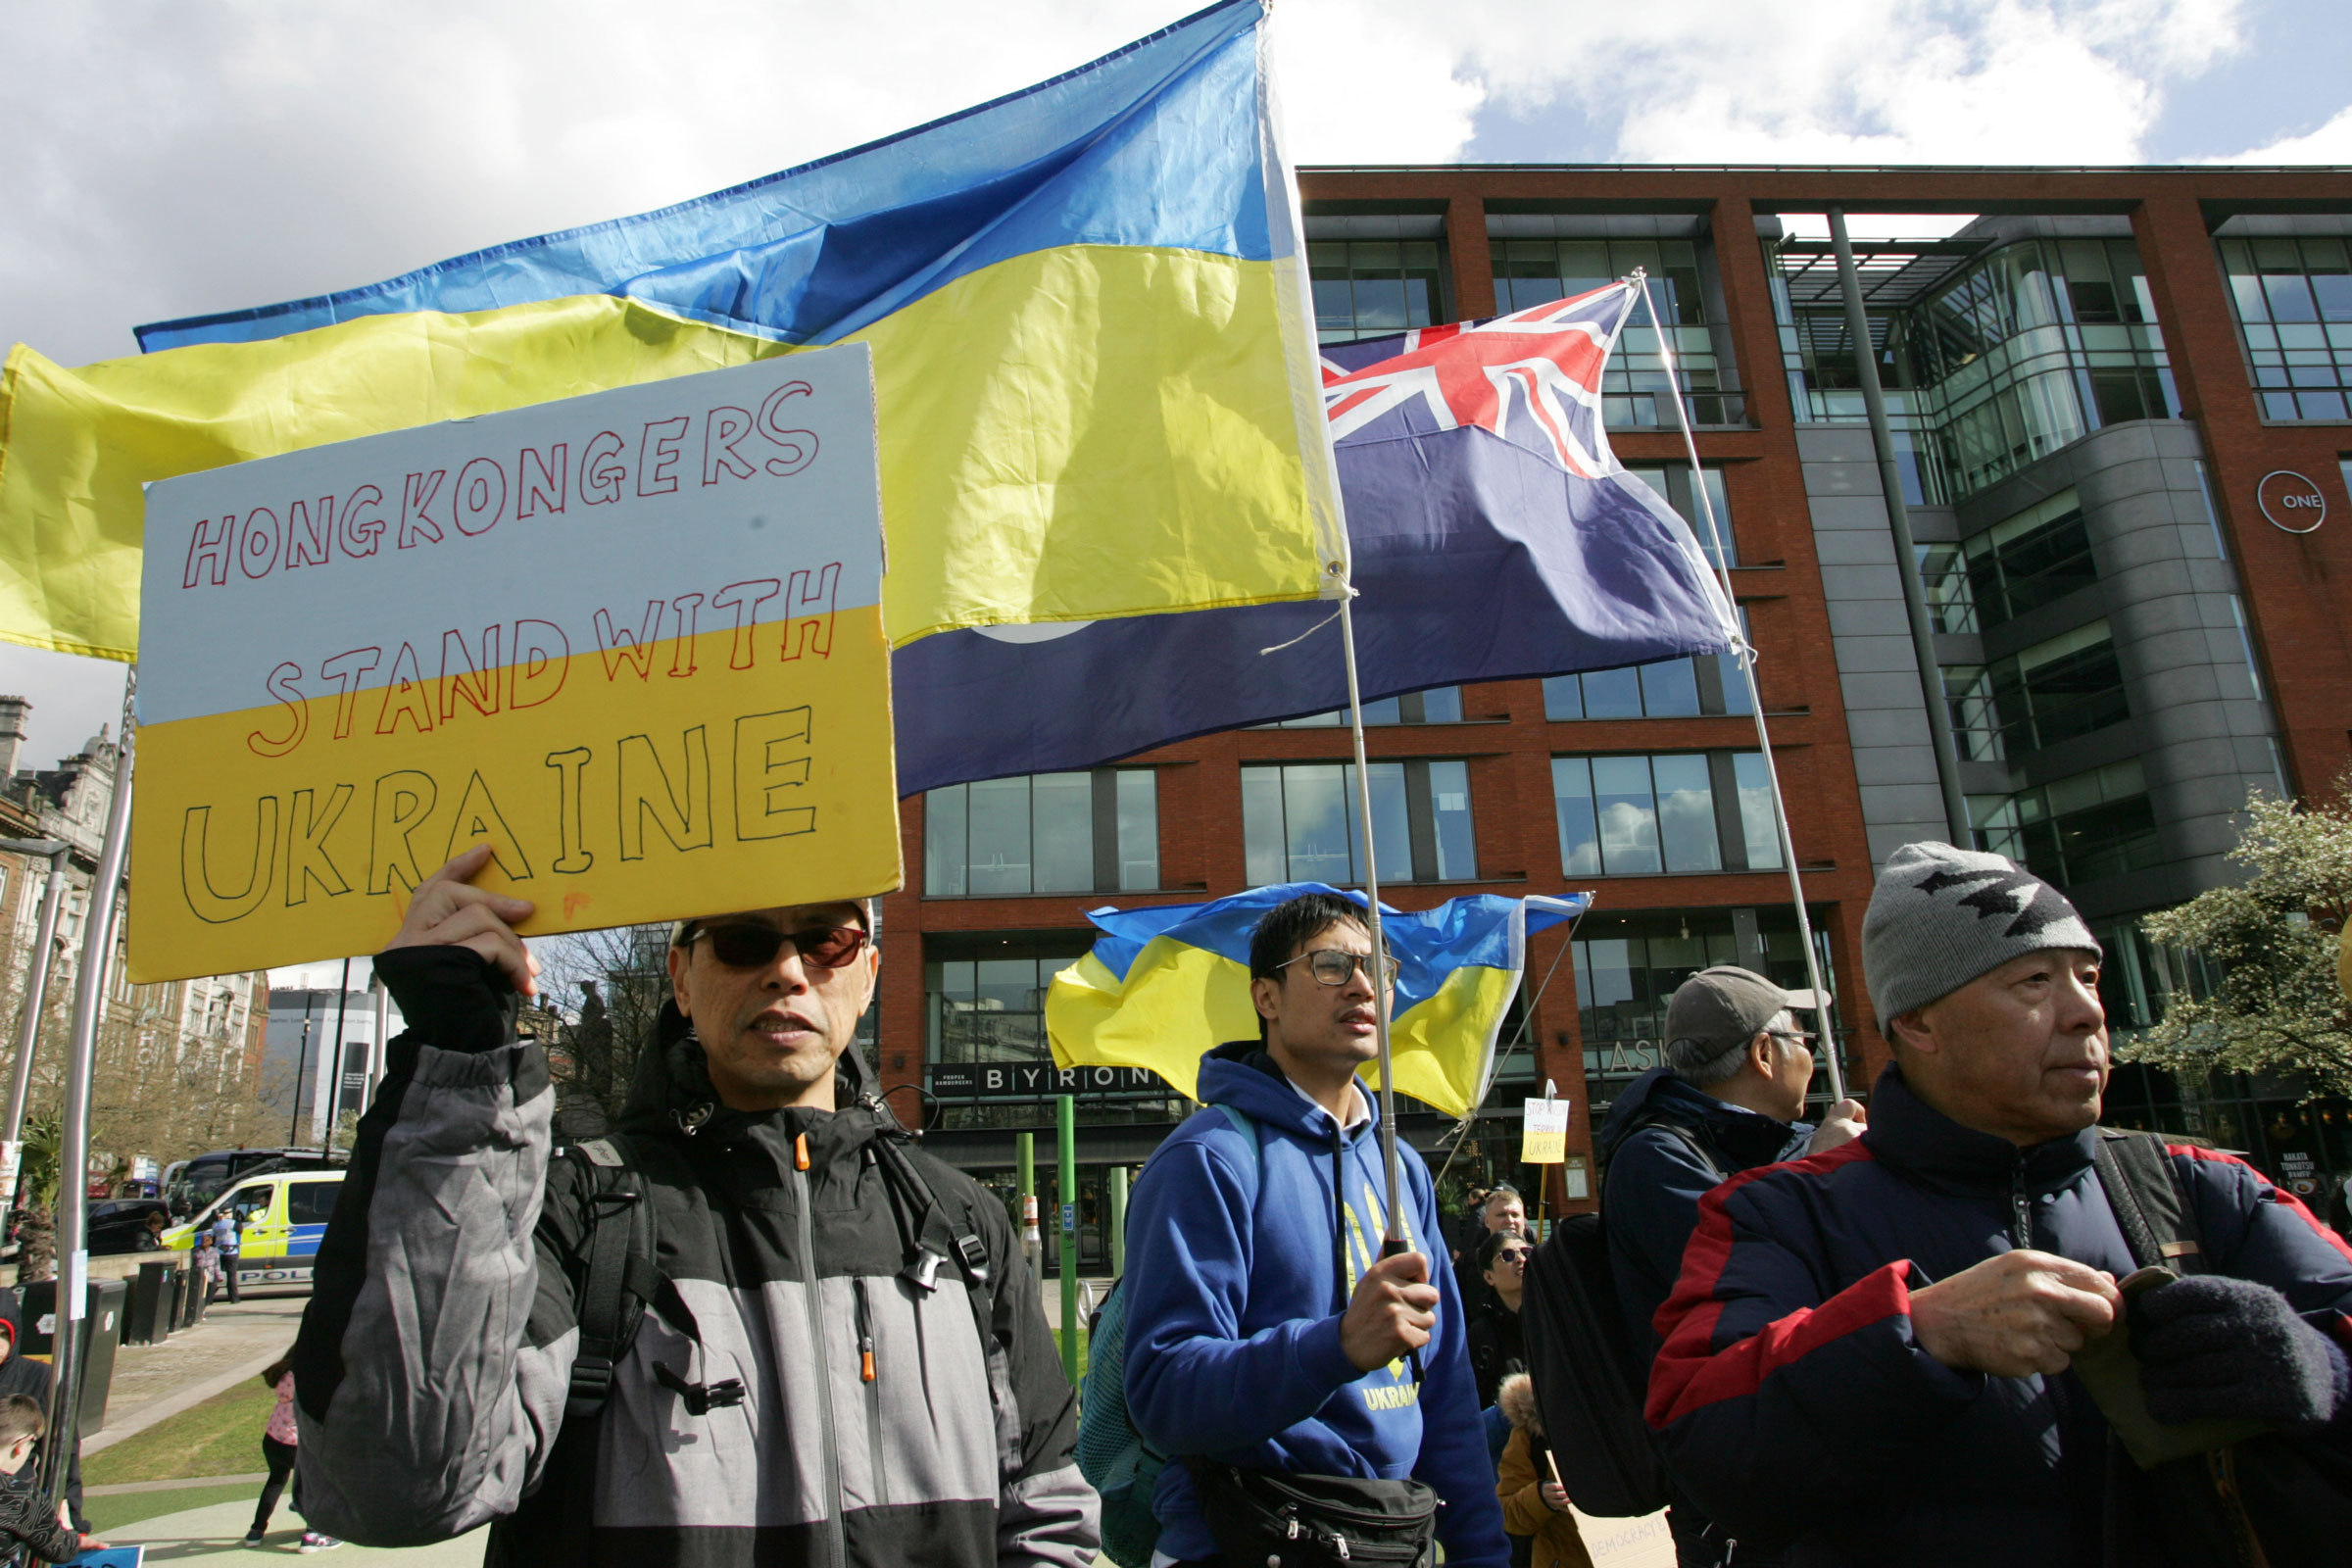 A member of Manchester's "Hong Kong" community, shows his and friends solidarity with Ukraine and its people